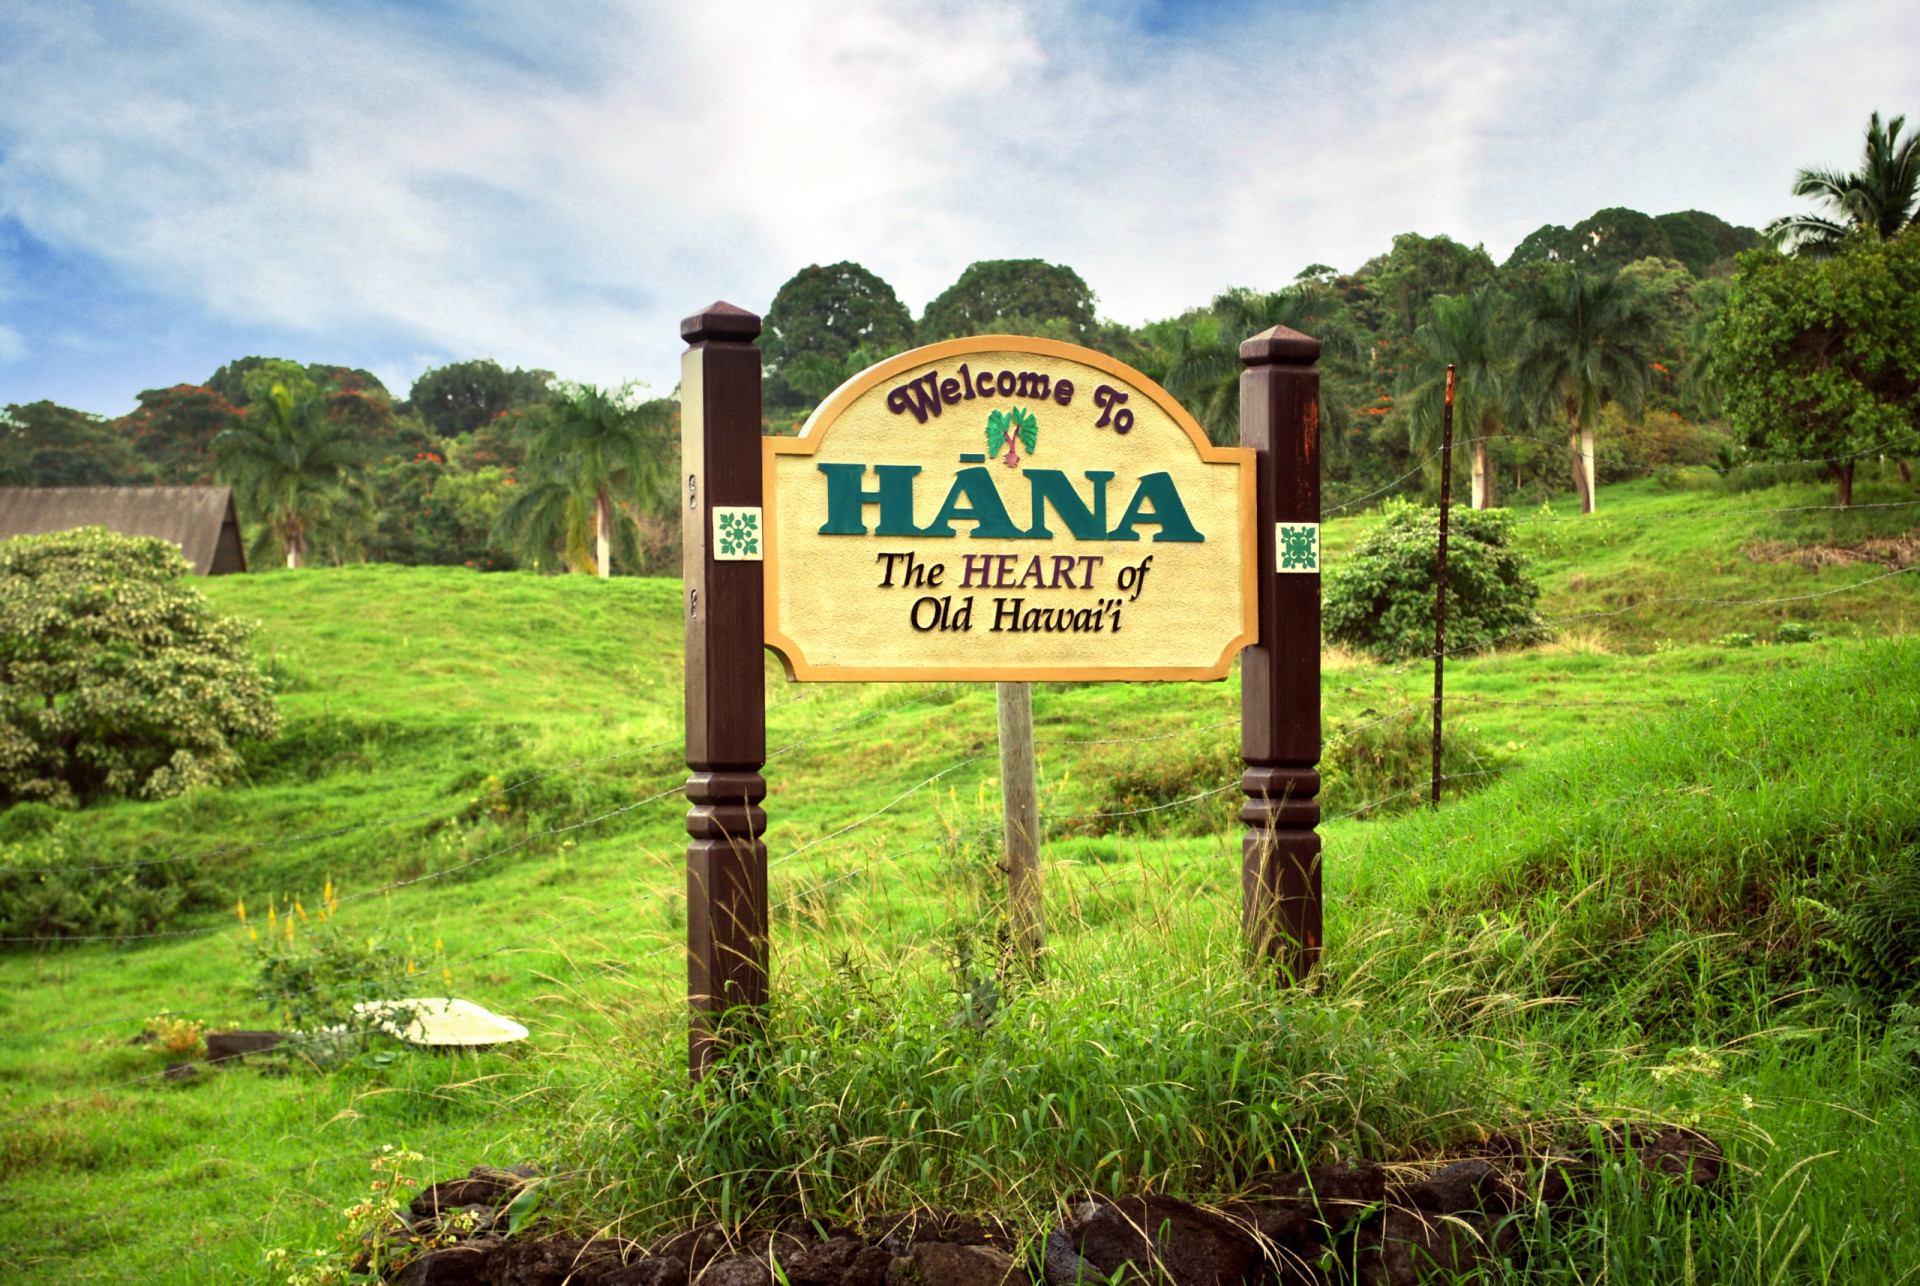 <p>The Aloha state doesn't have an official state sign, but there are a few signs spread out across the islands, like this one welcoming visitors to the historic town of Hana.</p><p><a href="https://www.msn.com/en-us/community/channel/vid-7xx8mnucu55yw63we9va2gwr7uihbxwc68fxqp25x6tg4ftibpra?cvid=94631541bc0f4f89bfd59158d696ad7e">Follow us and access great exclusive content every day</a></p>